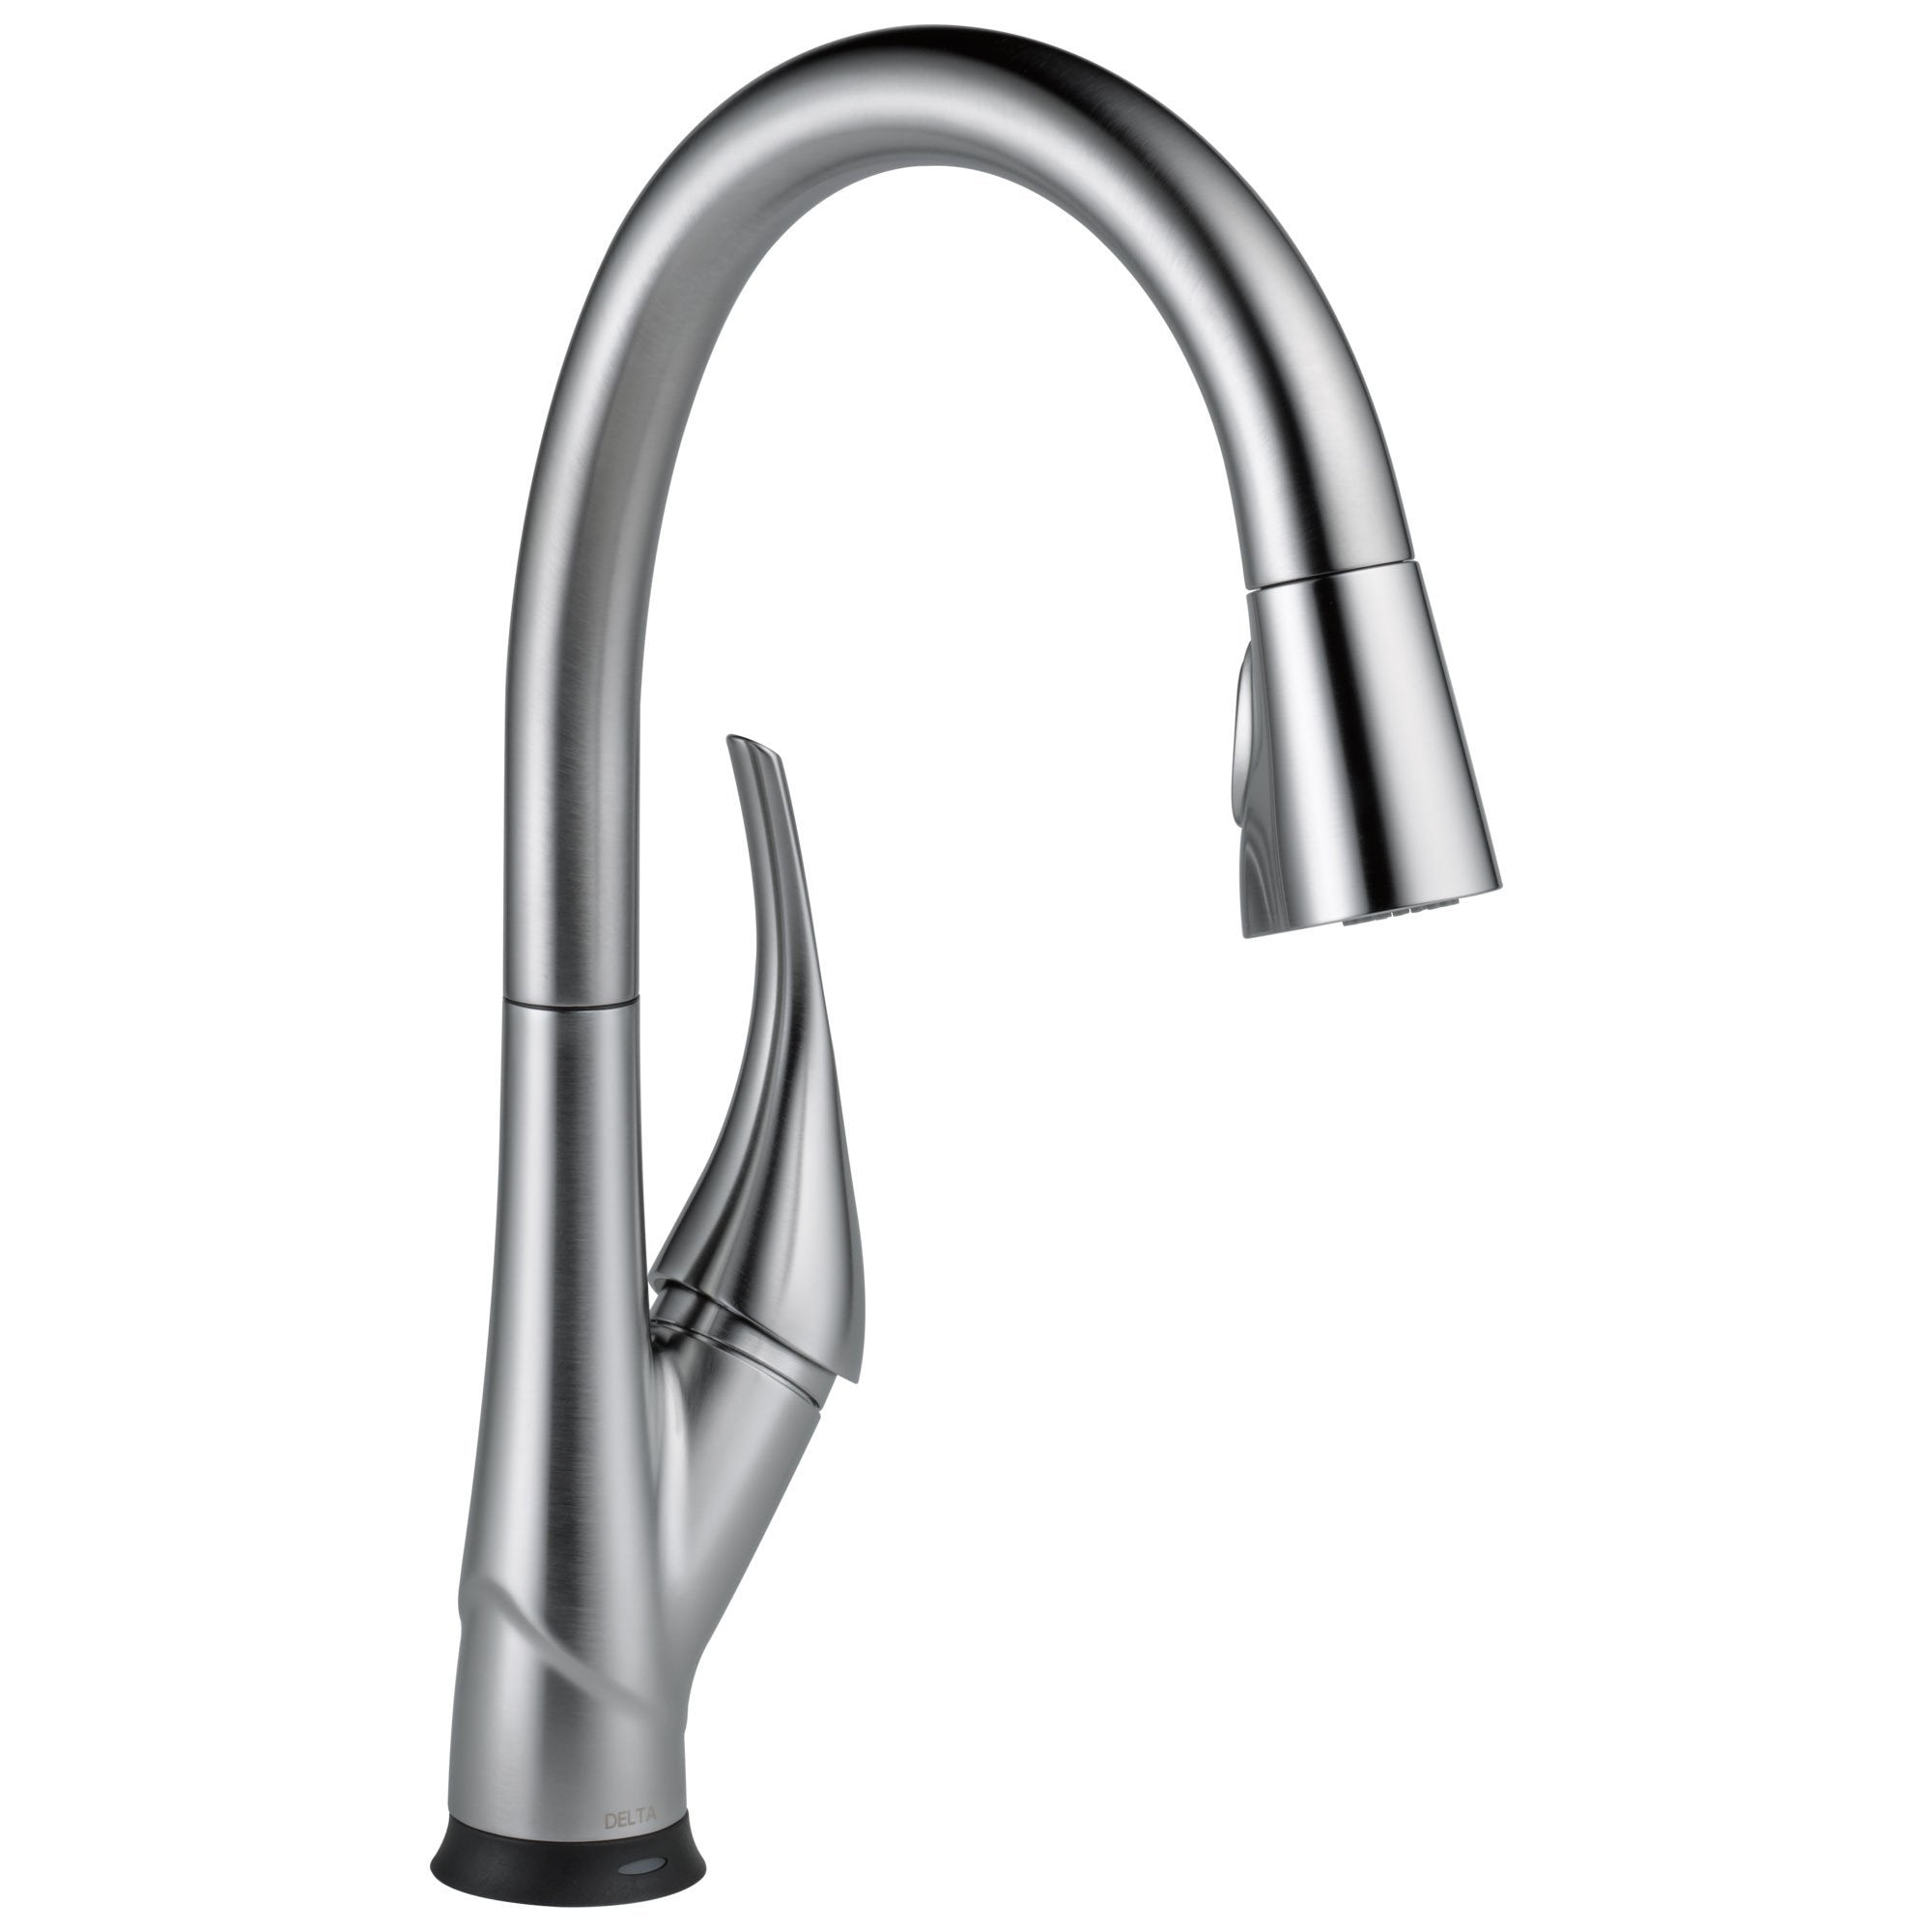 Delta Esque Collection Arctic Stainless Steel Finish Single-Handle Pull-Down Electronic Kitchen Sink Faucet with Touch2O Technology D9181TARDST